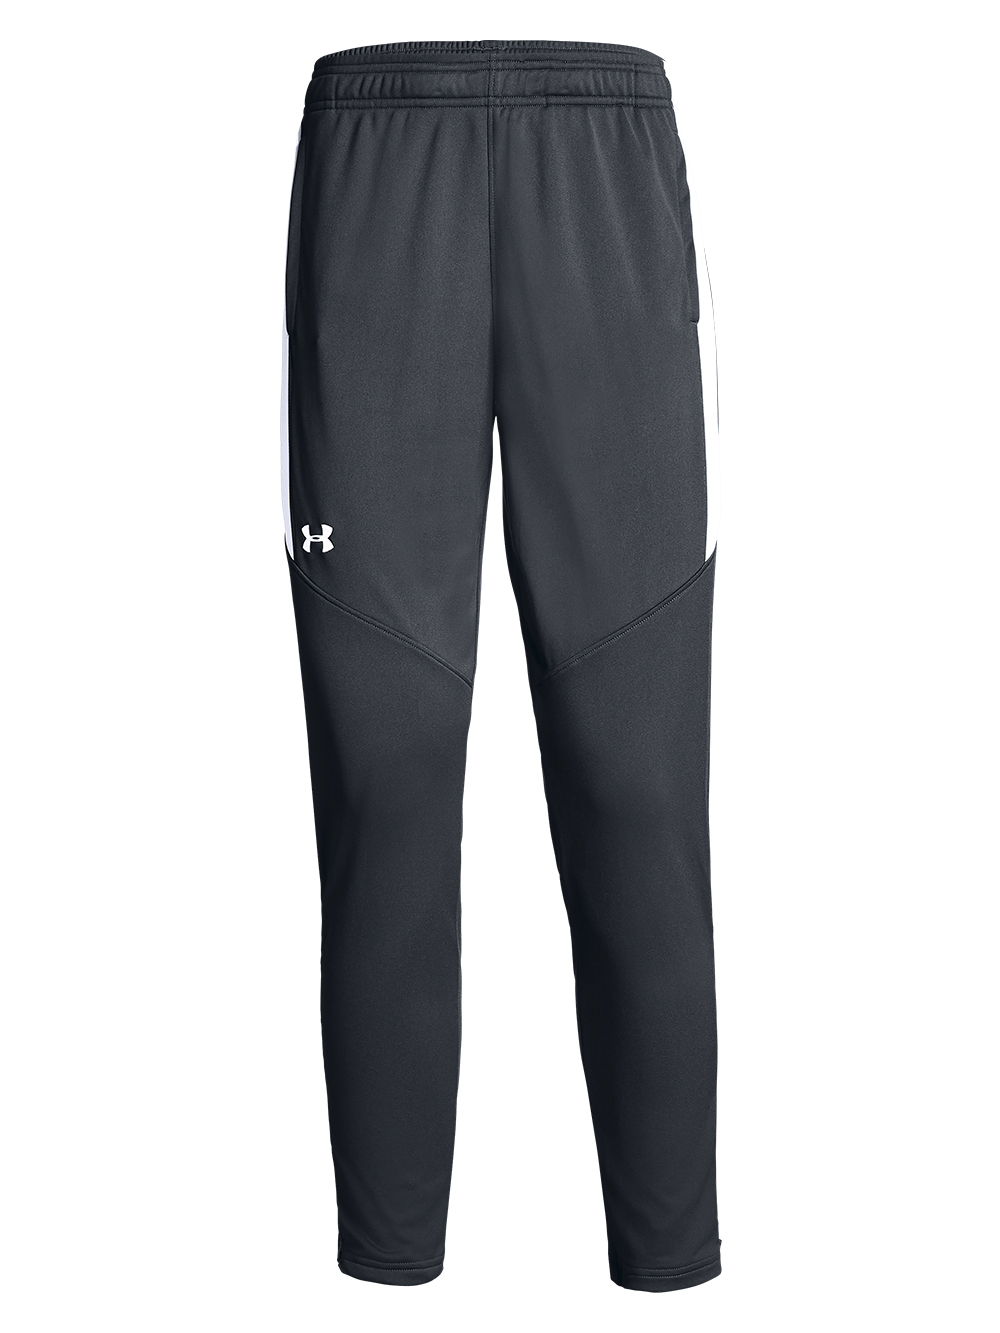 under armour women's tall sweatpants